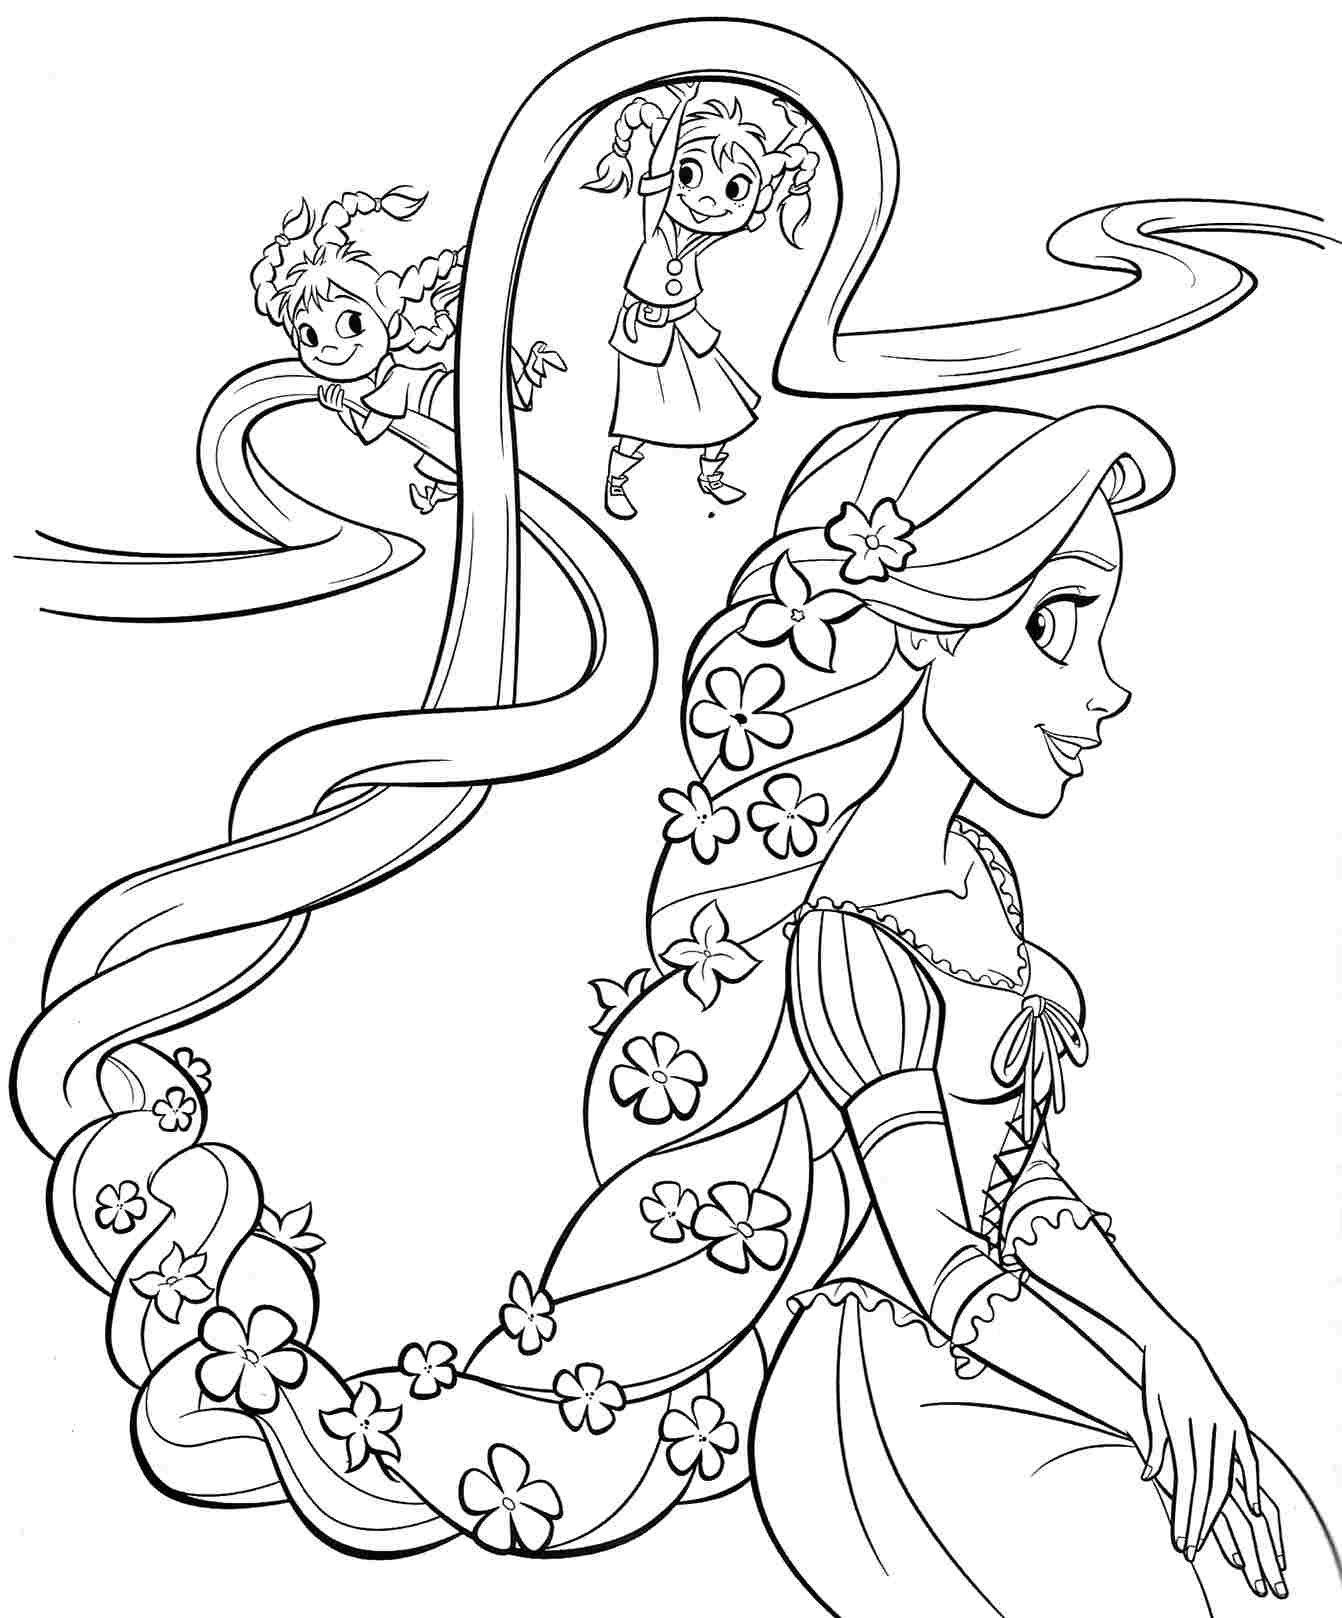 tangled eugene coloring pages - photo #12